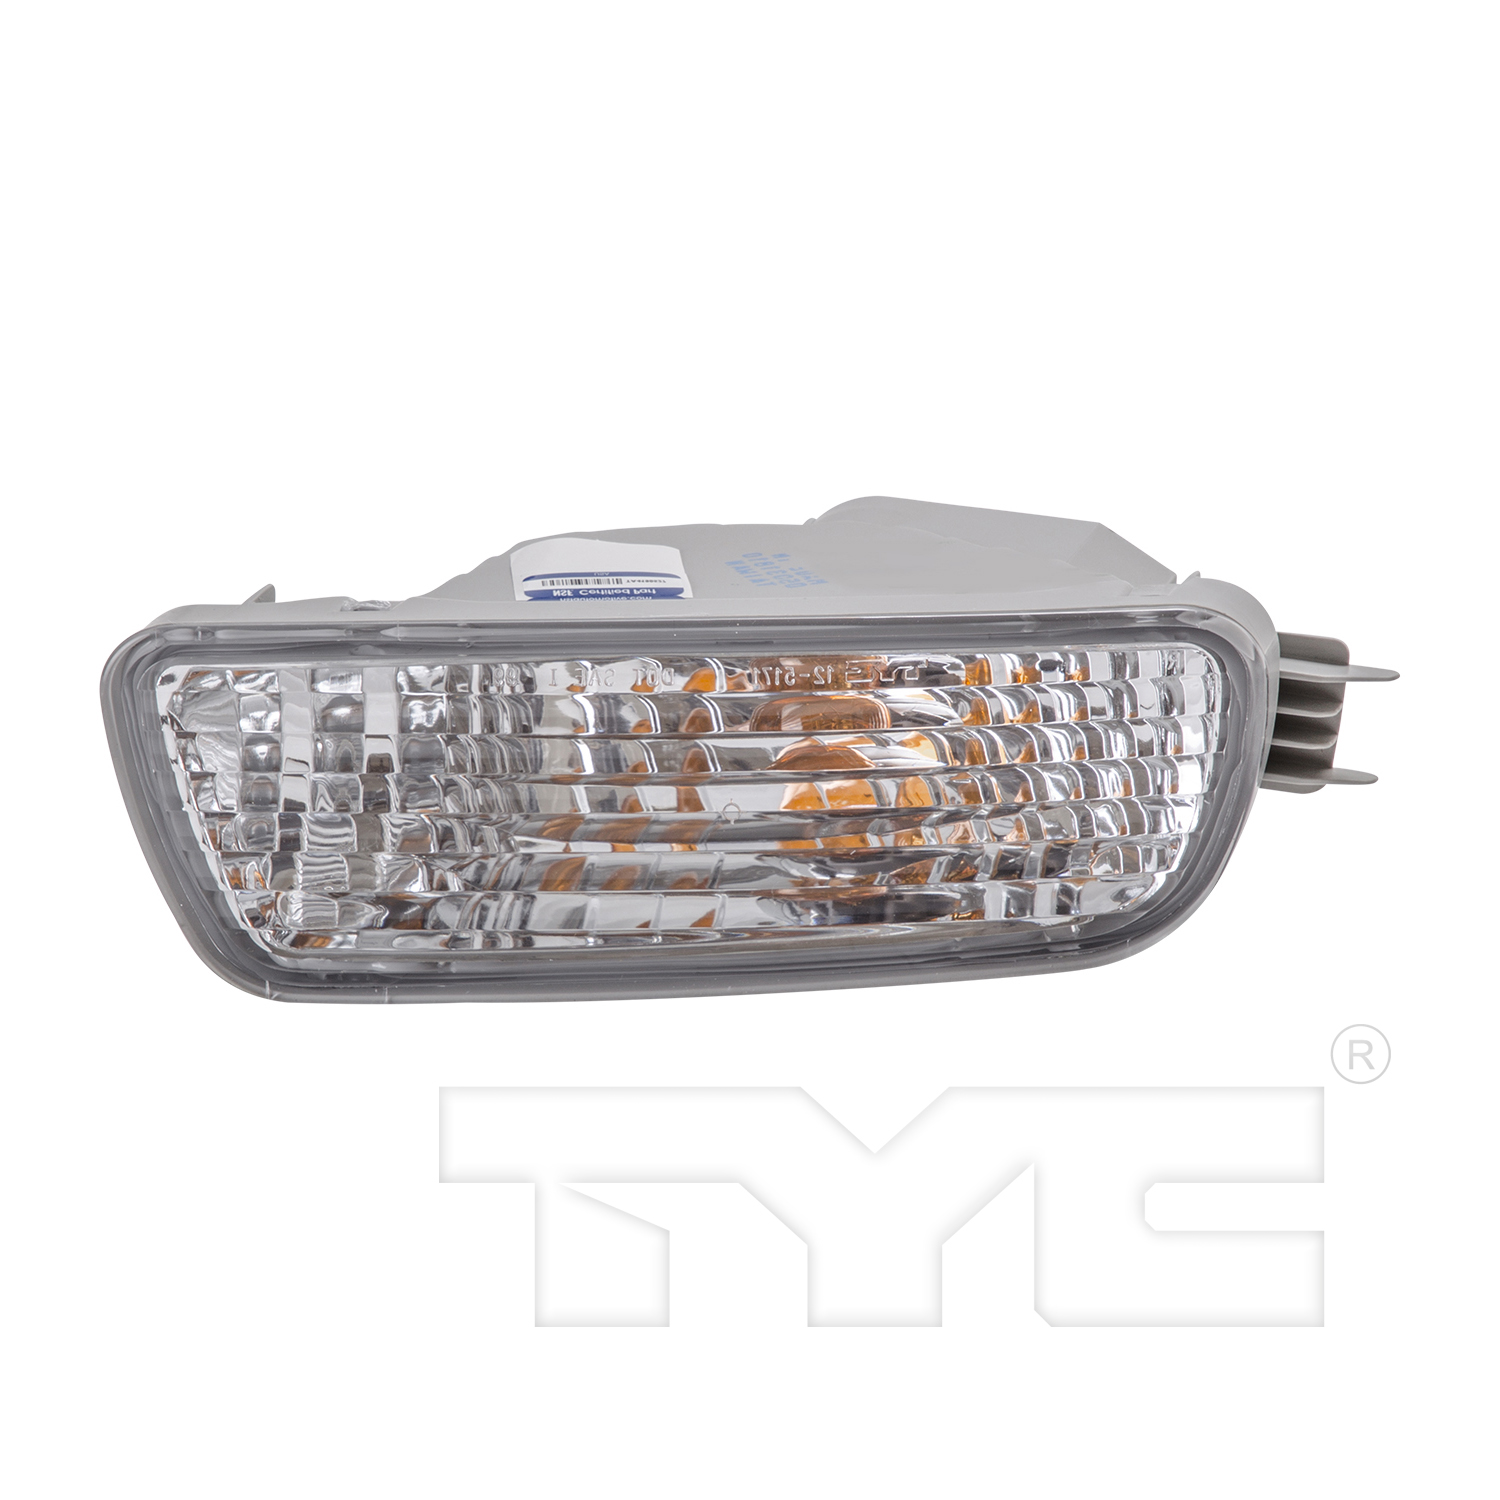 Aftermarket LAMPS for TOYOTA - TACOMA, TACOMA,01-04,LT Front signal lamp